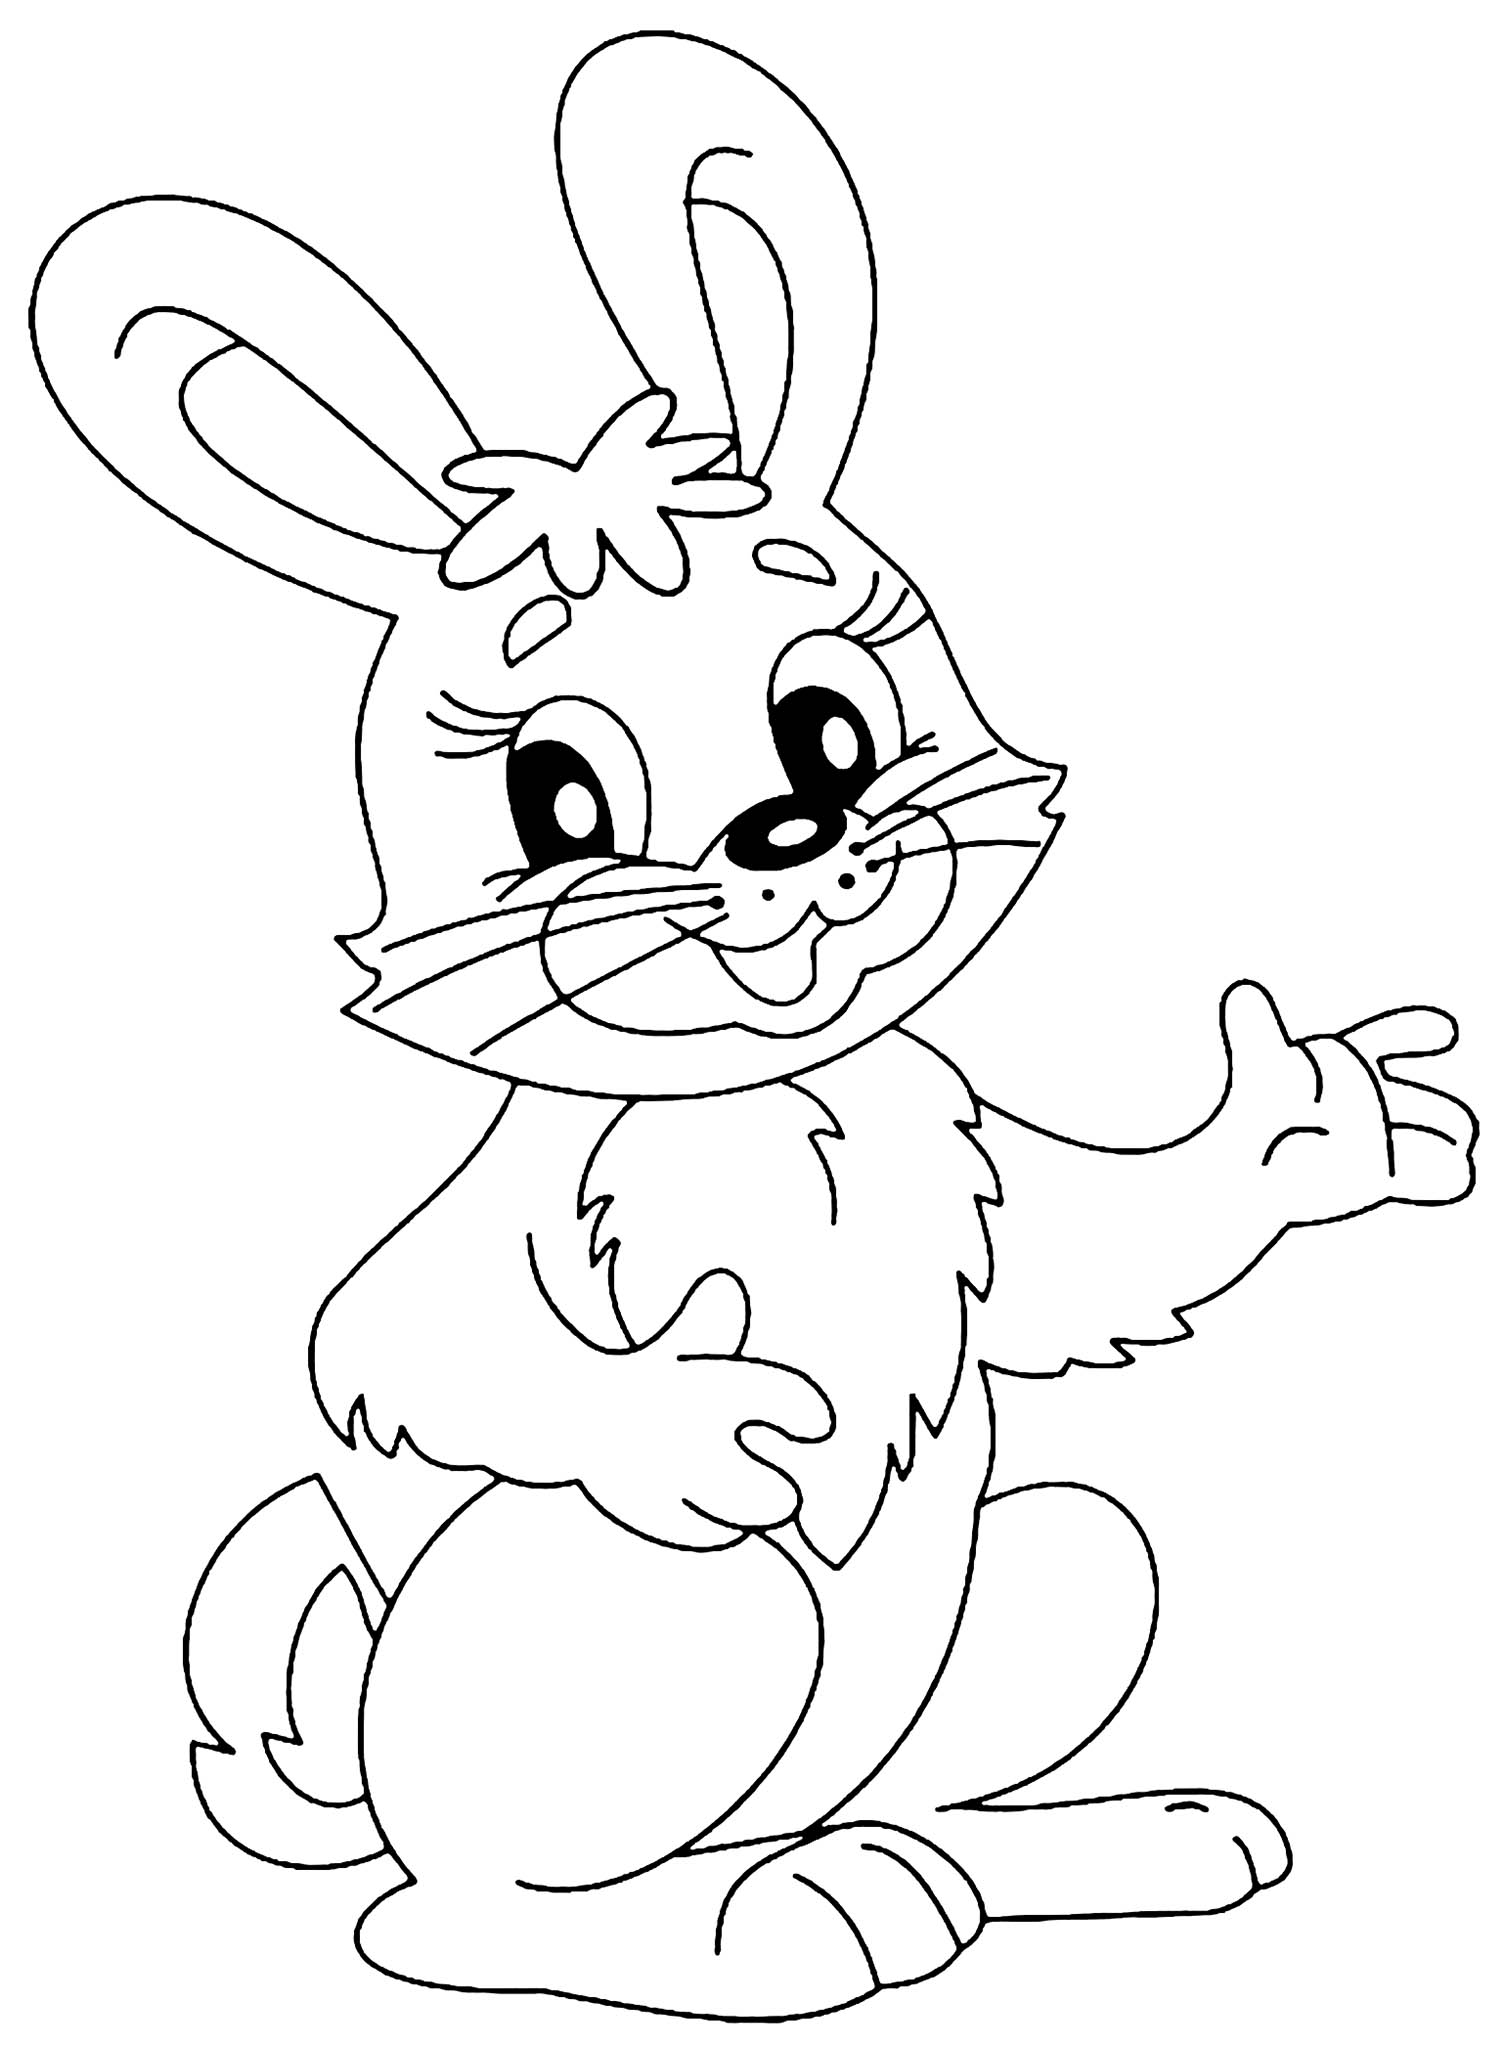 Rabbit to color for children - Rabbit Kids Coloring Pages